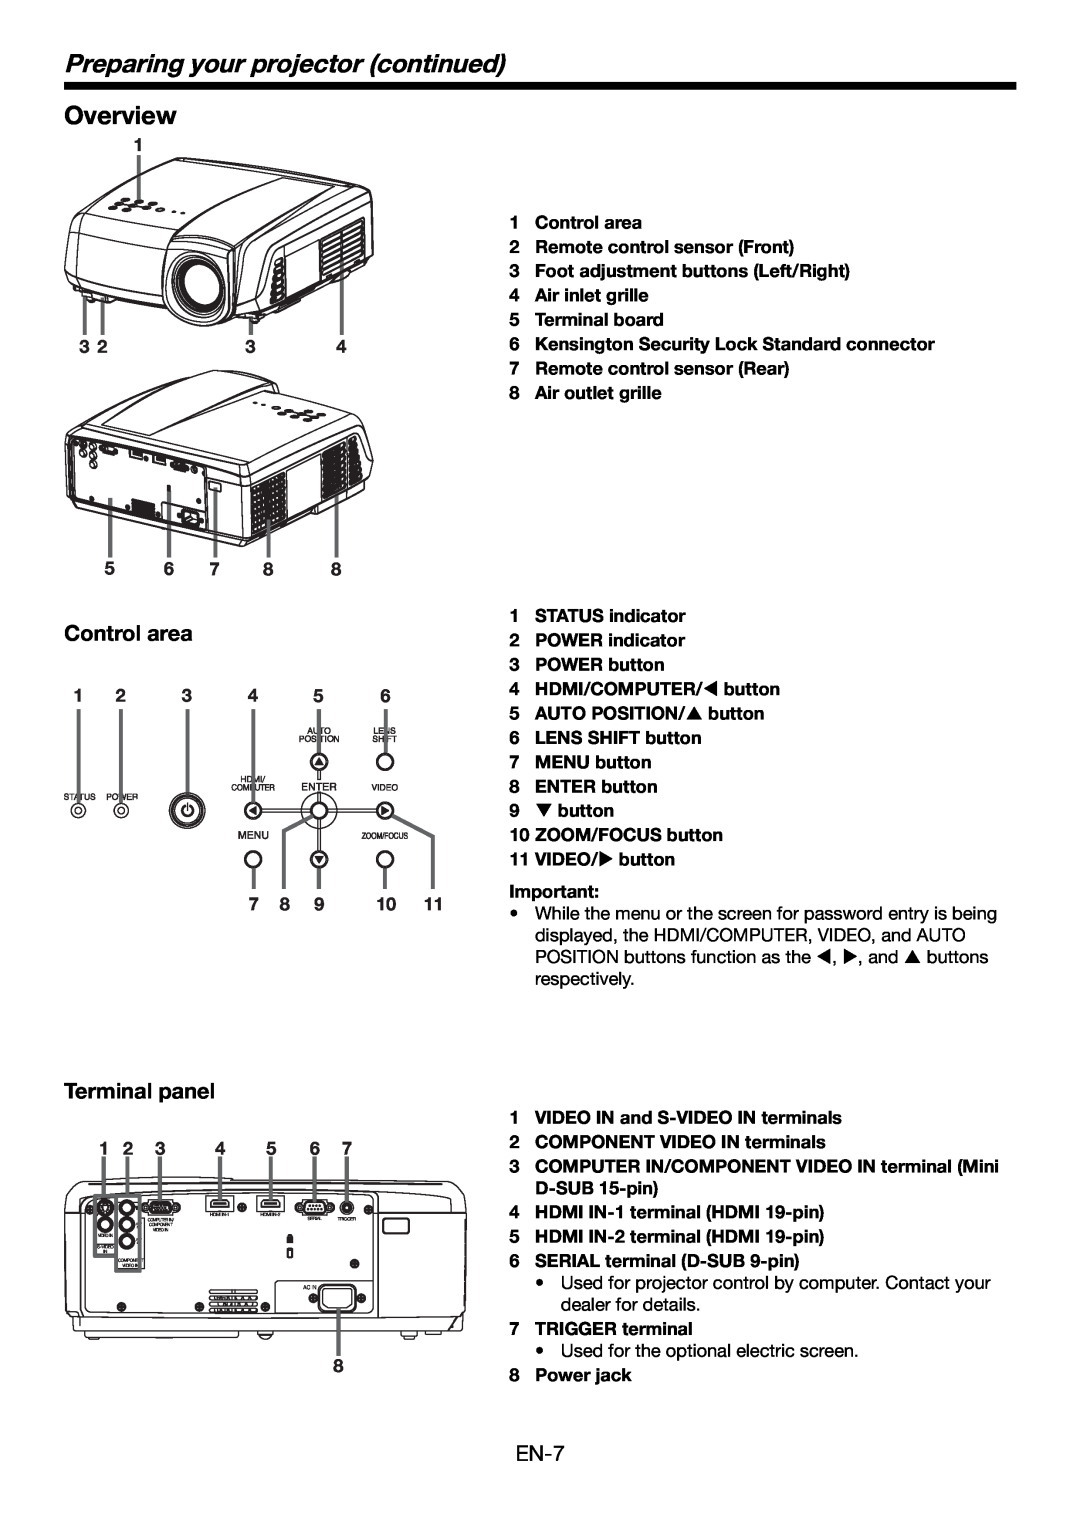 Mitsubishi Electronics HC6000 Preparing your projector continued, Overview, Control area, Terminal panel, TRIGGER terminal 